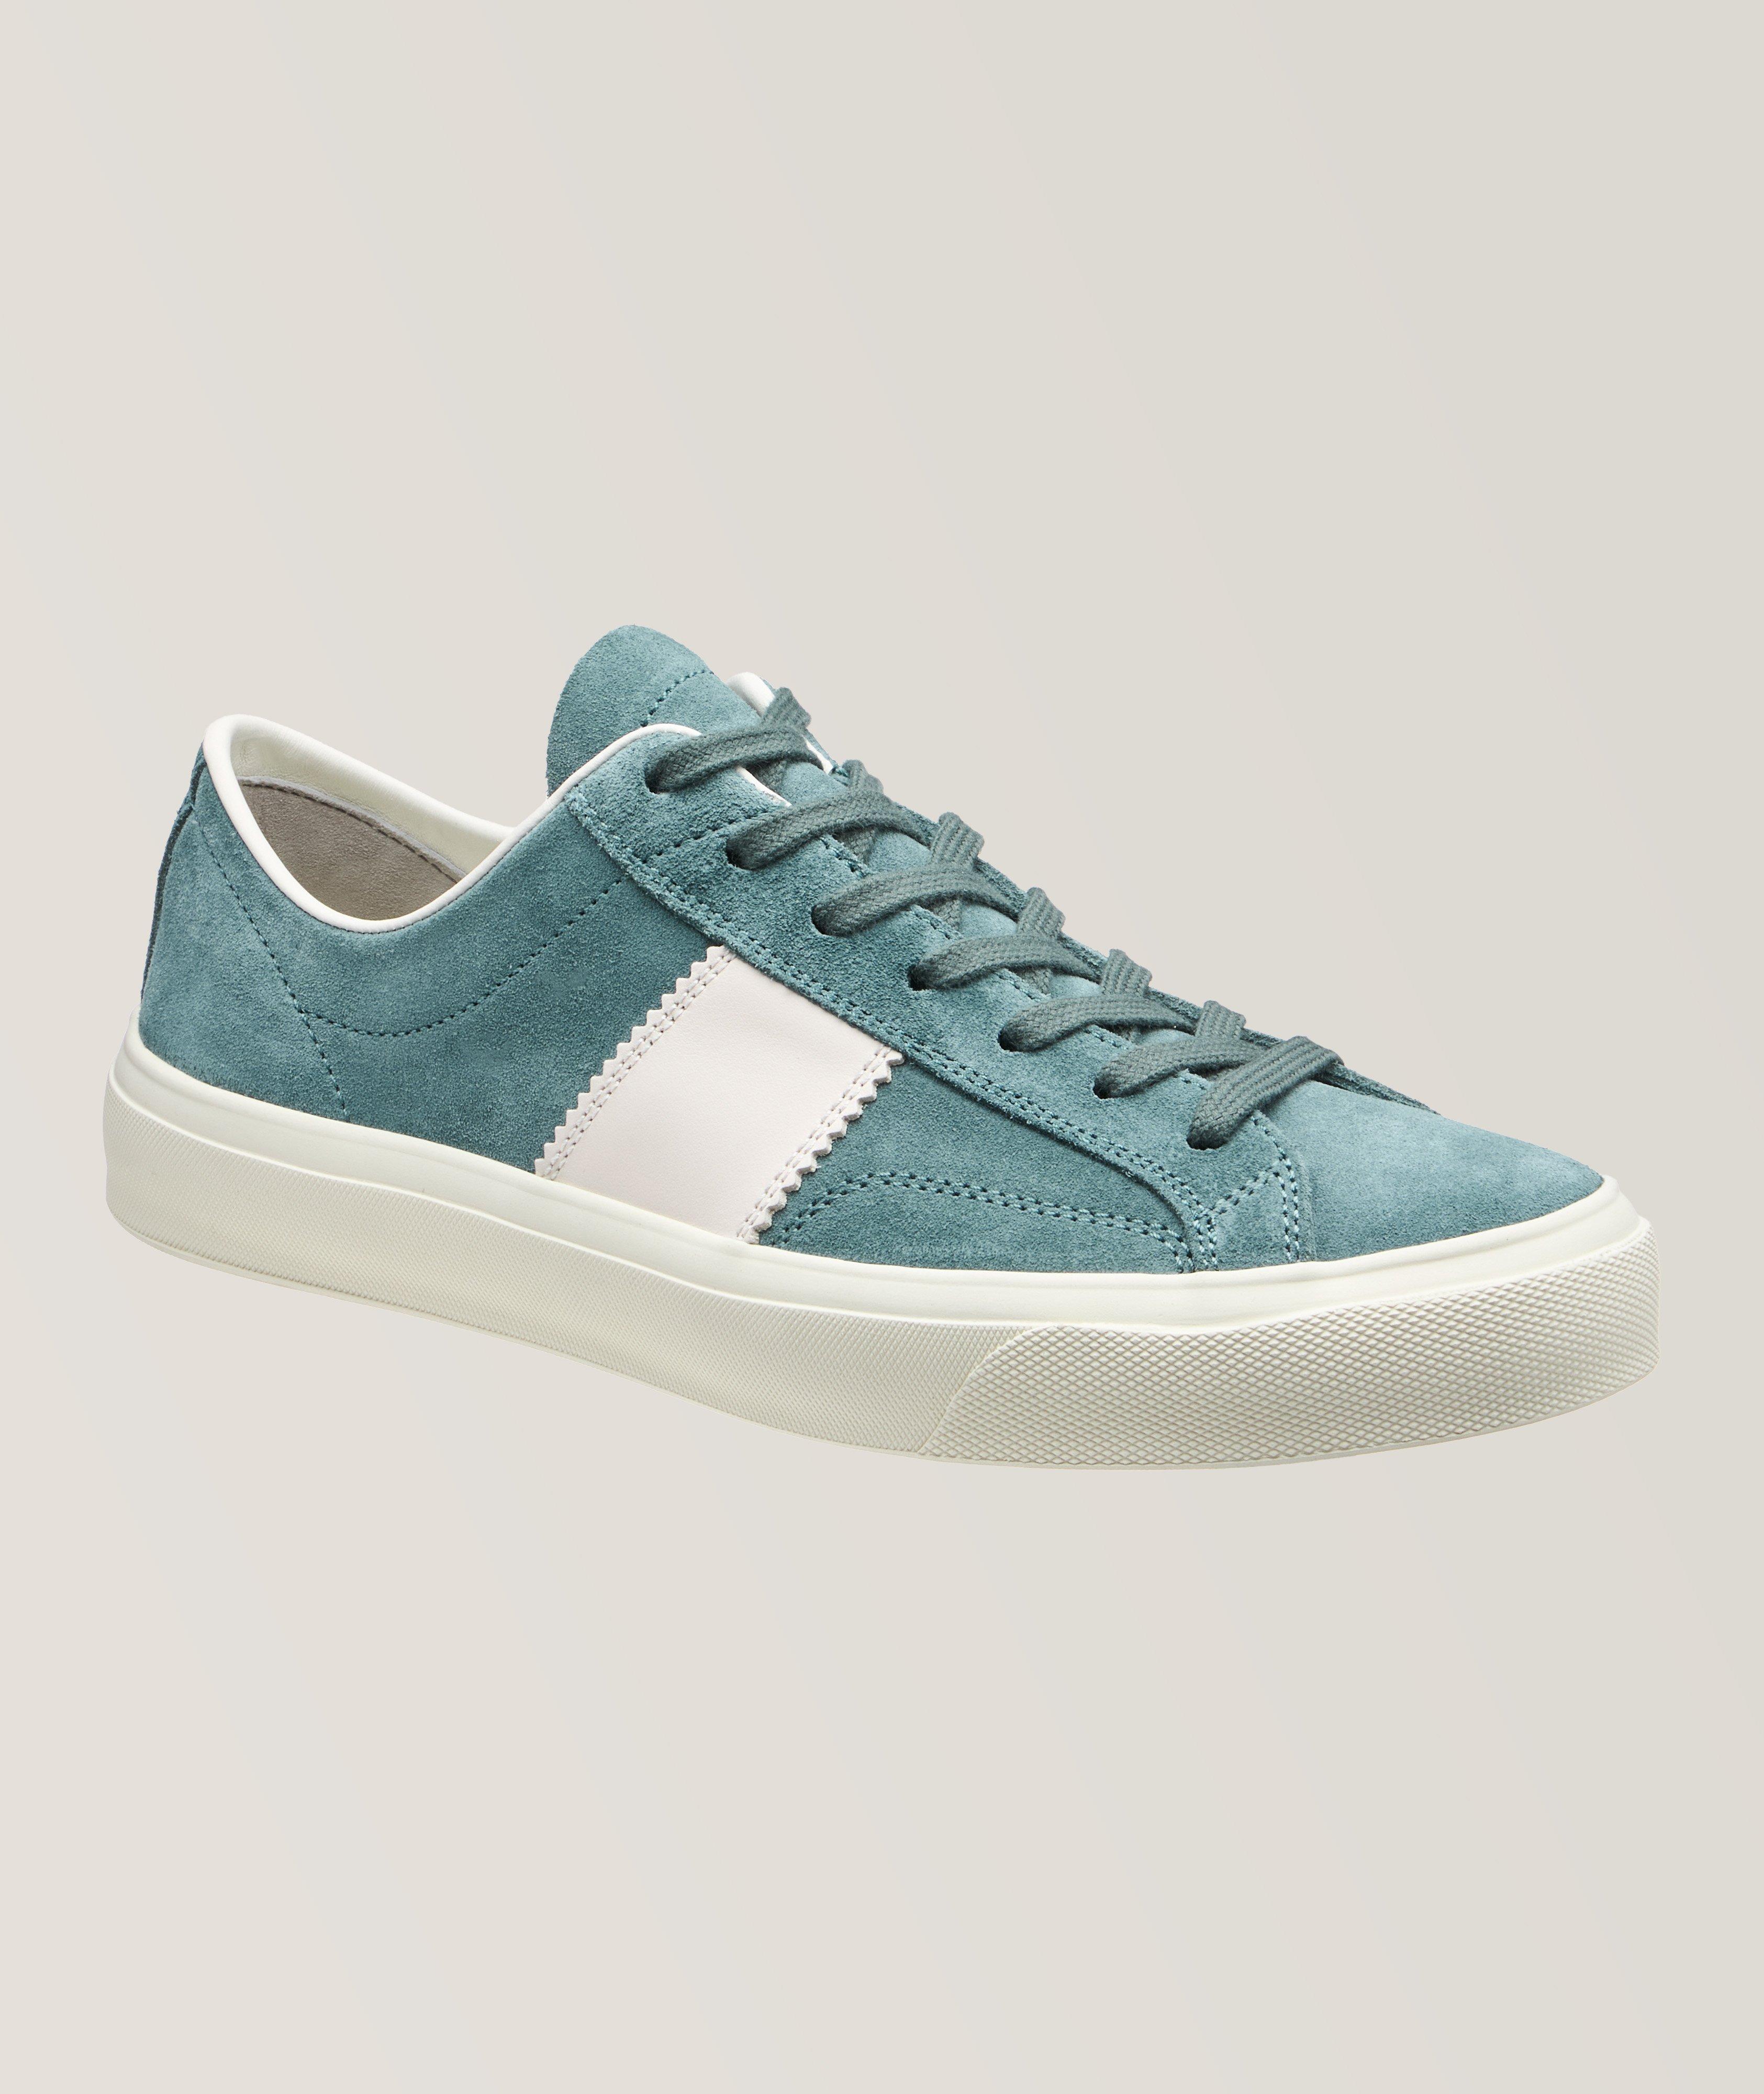 Cambridge Leather Panel Suede Sneakers image 0